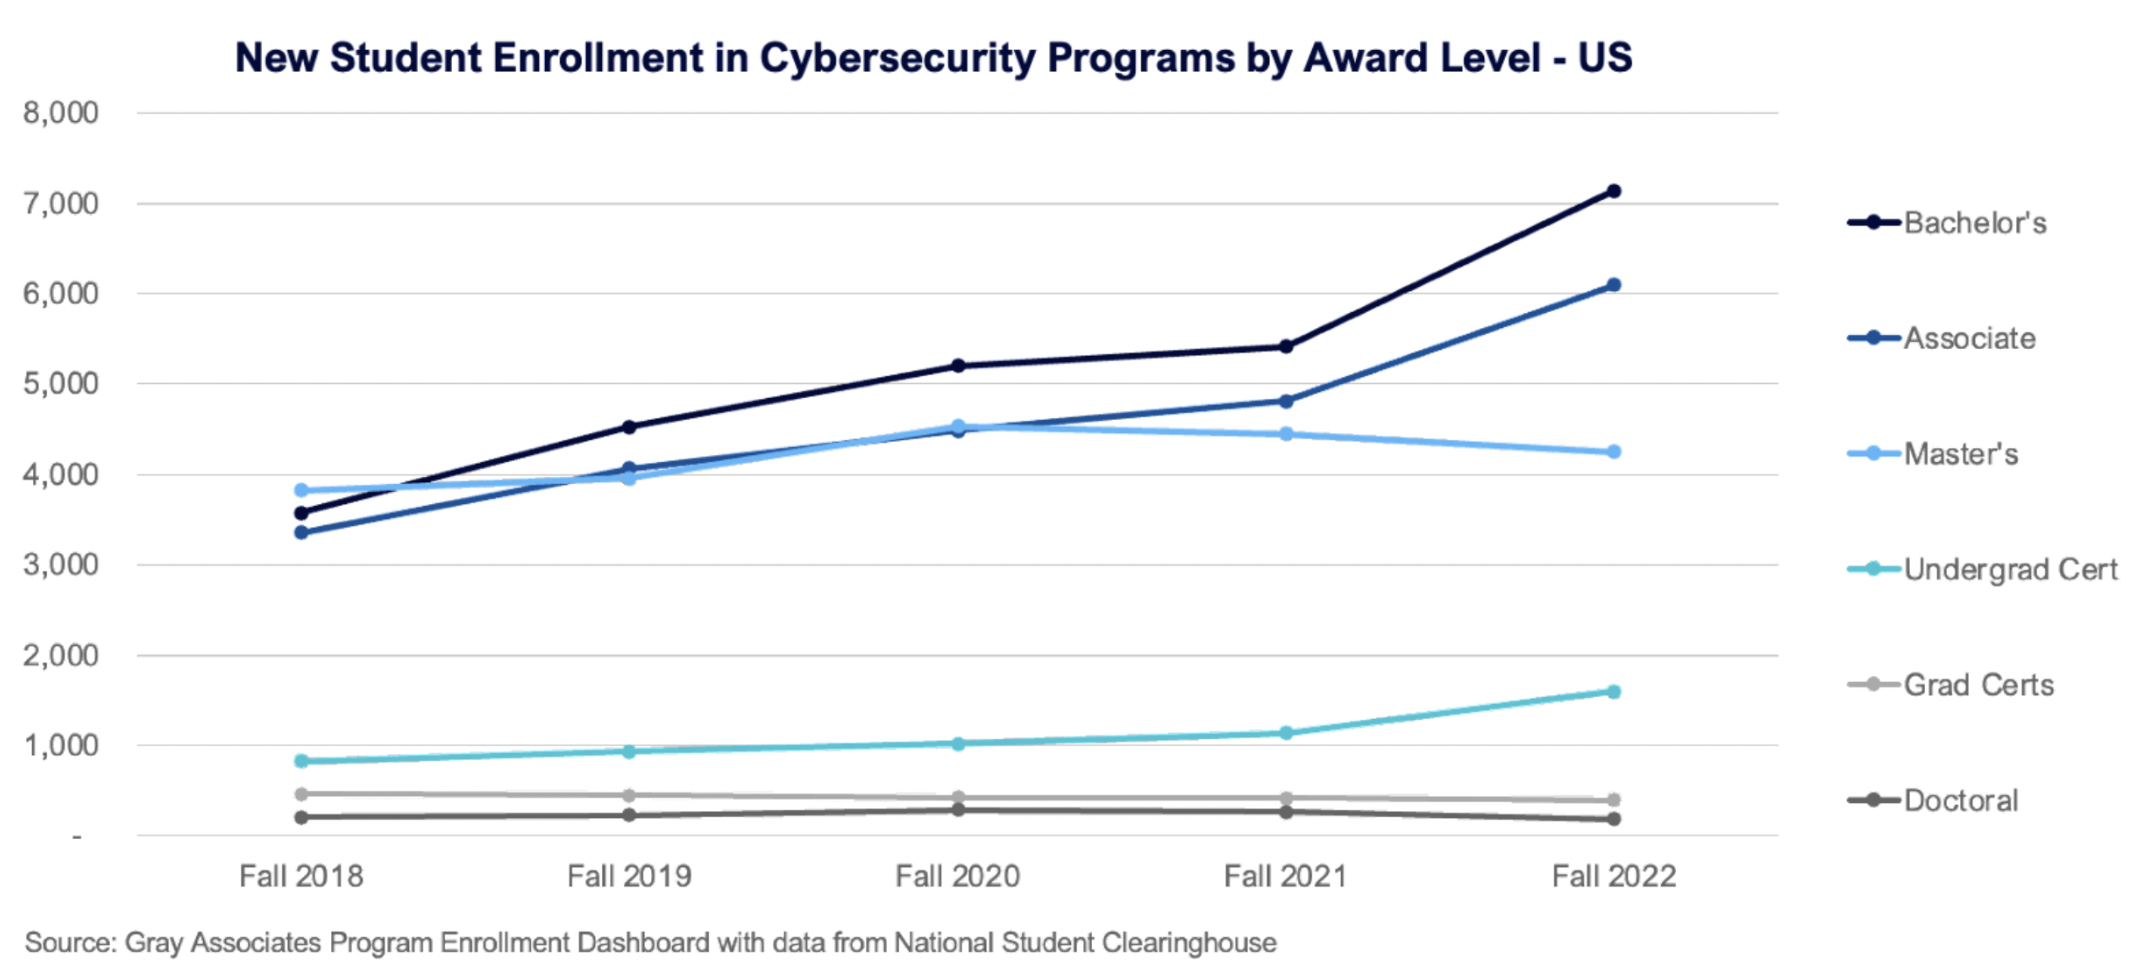 New Student Enrollment in Cybersecurity Programs by Award Level - US